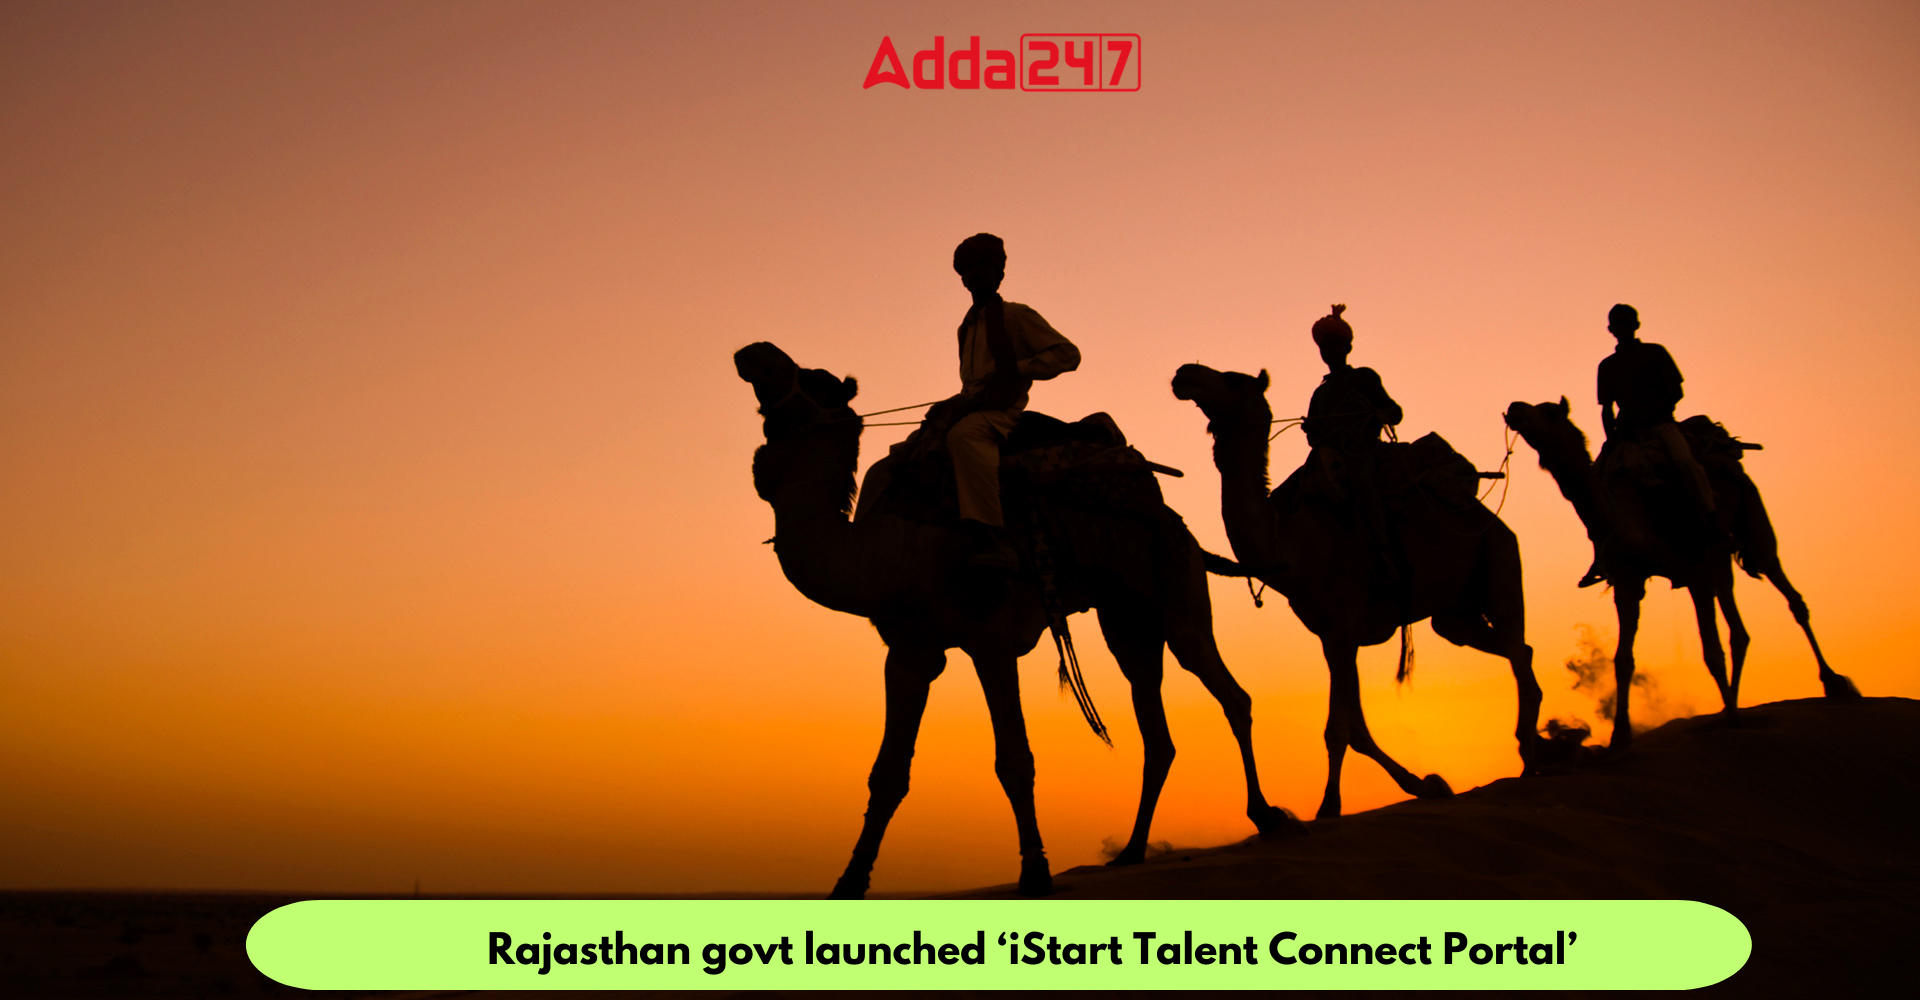 Rajasthan govt launched ‘iStart Talent Connect Portal’